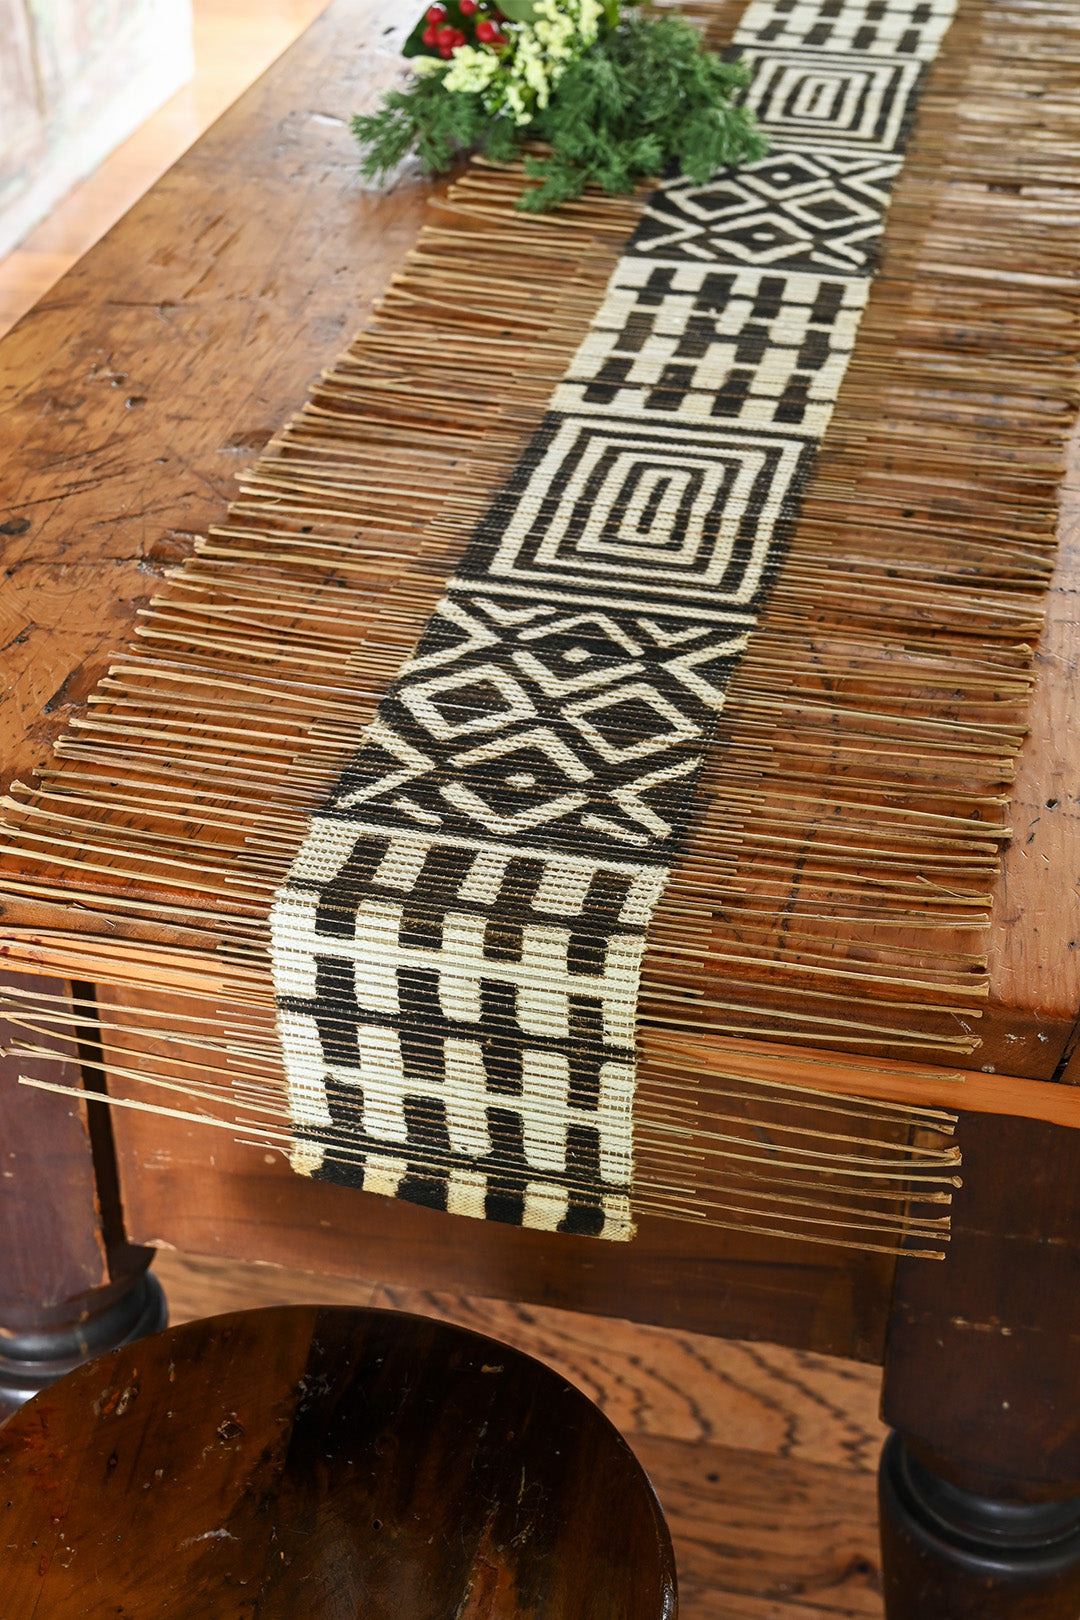 Black & White Mixed Motif Twig Table Runner